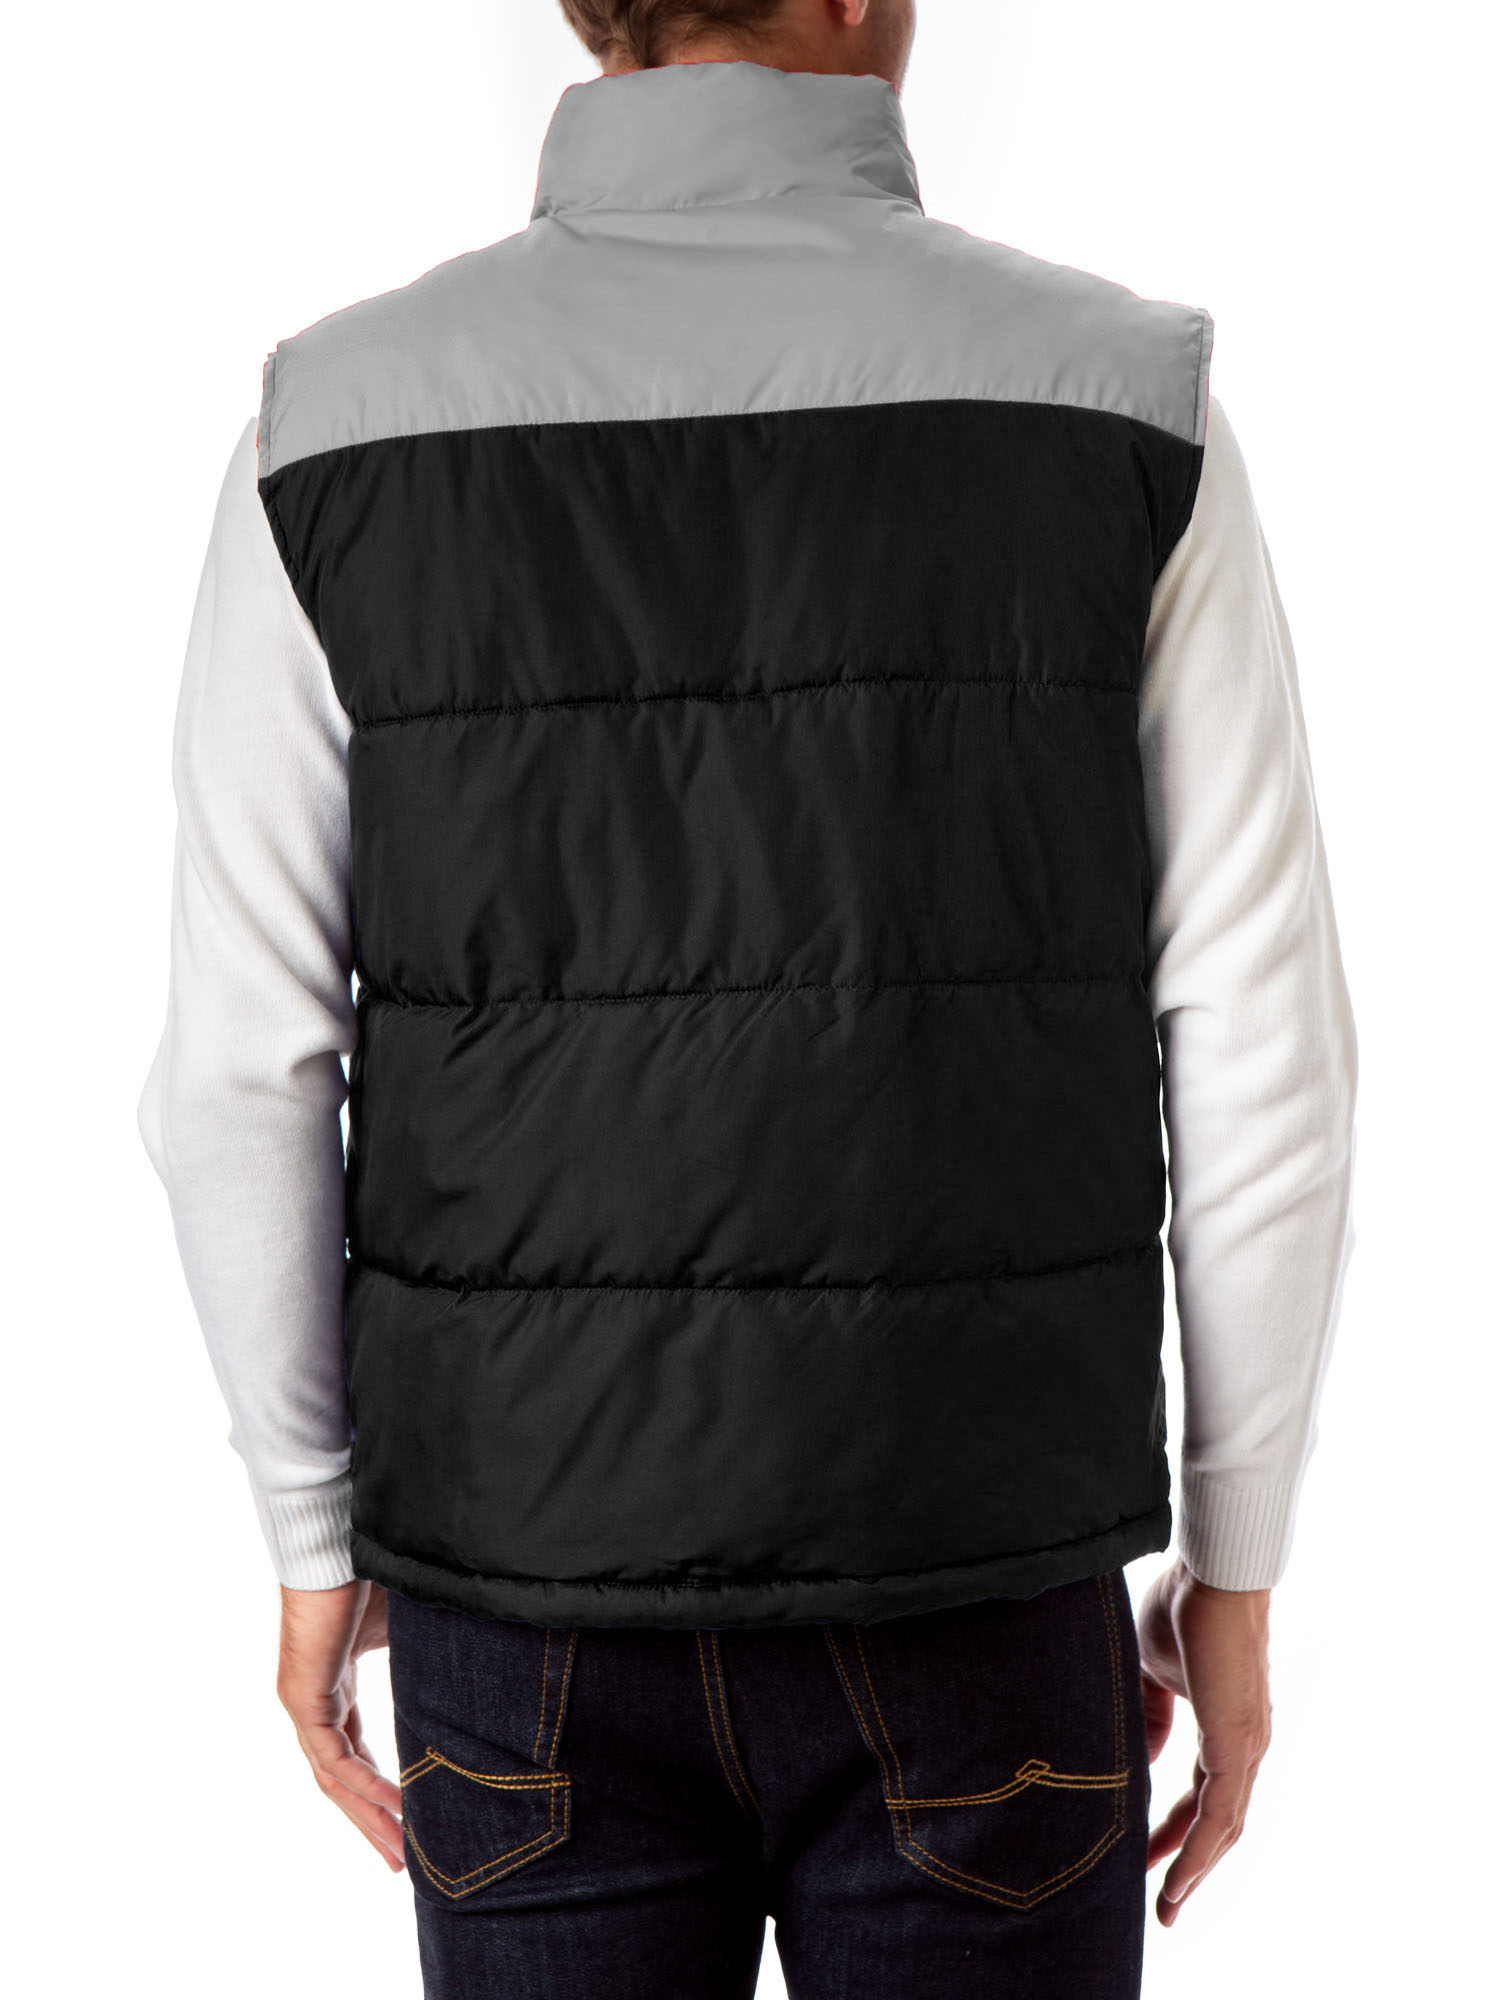 U.S. Polo Assn. Puffer Vest - image 3 of 5